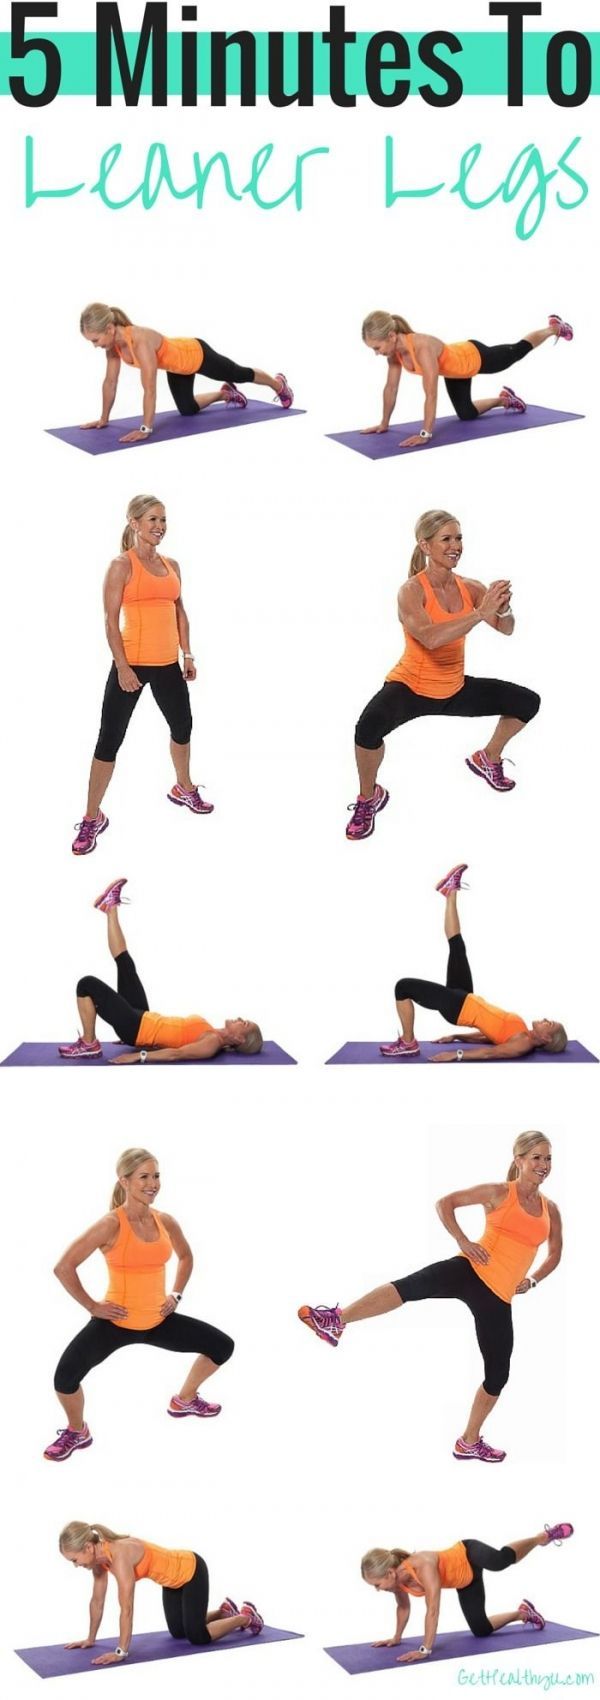 Flabby to Fit in 5, with These Magical 5-minute Workouts ... -   15 fitness legs girls
 ideas